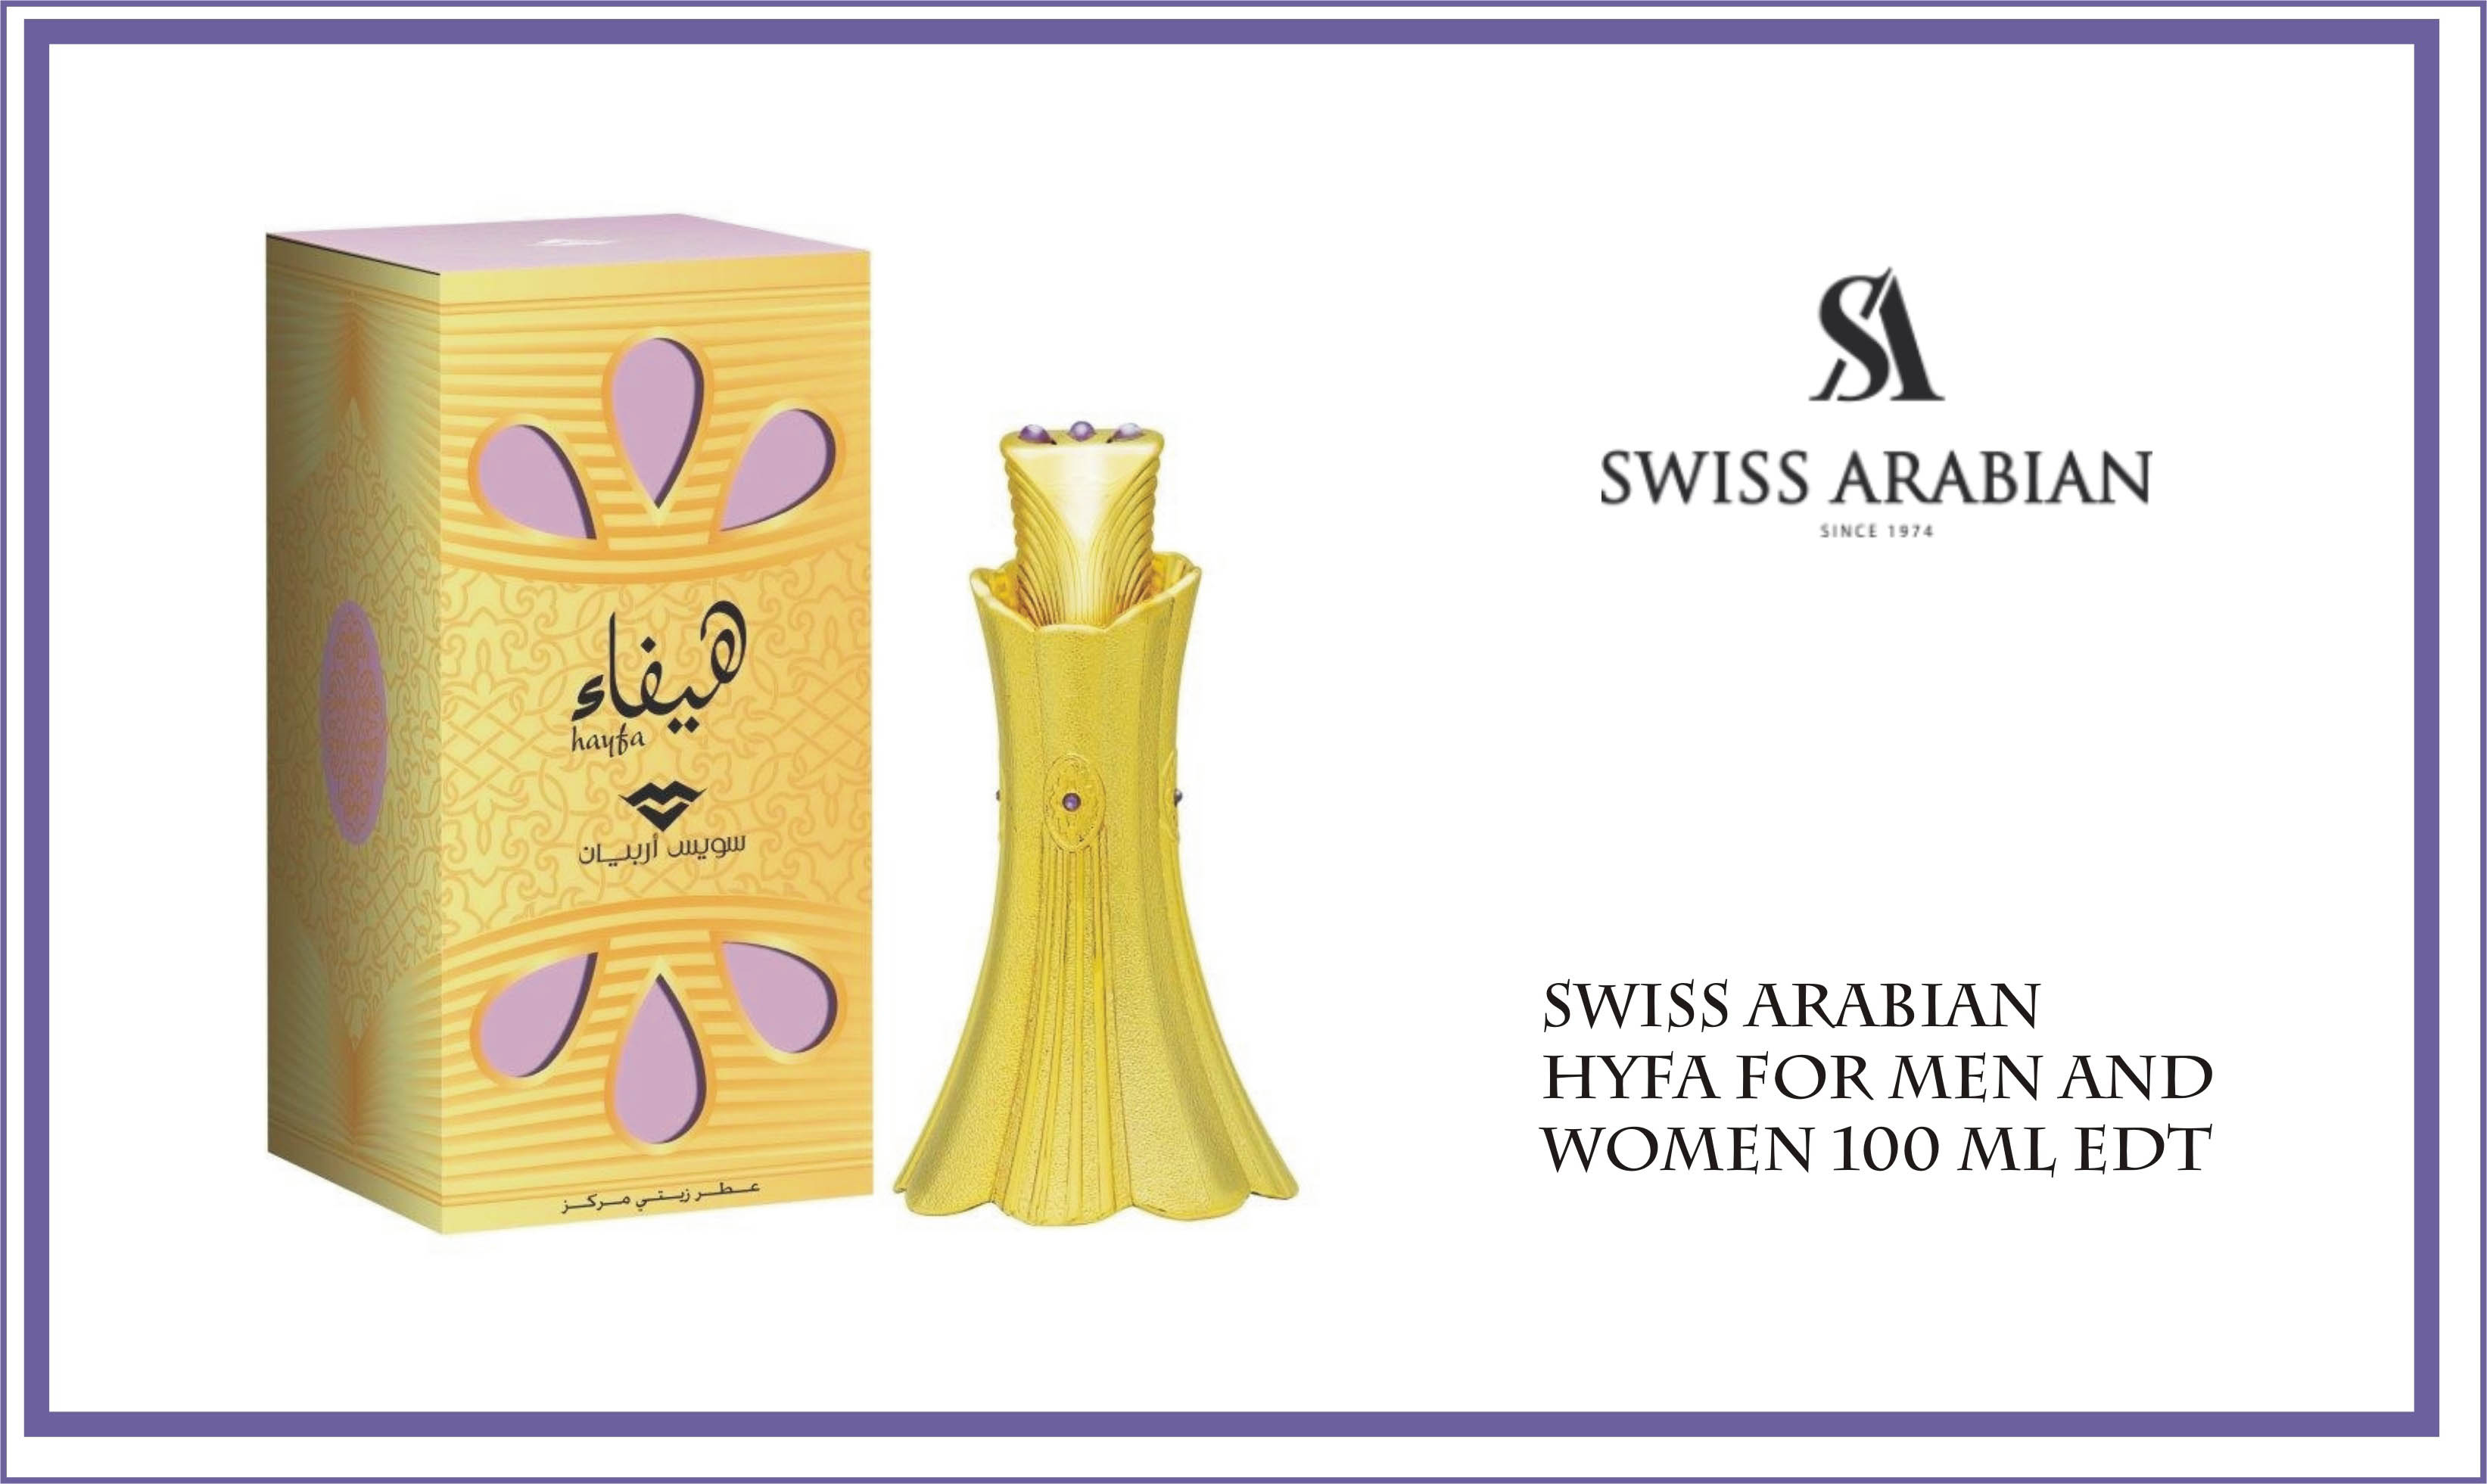 swiss-arabian-hayfa-concentrated-perfume-for-men-and-women-15-ml